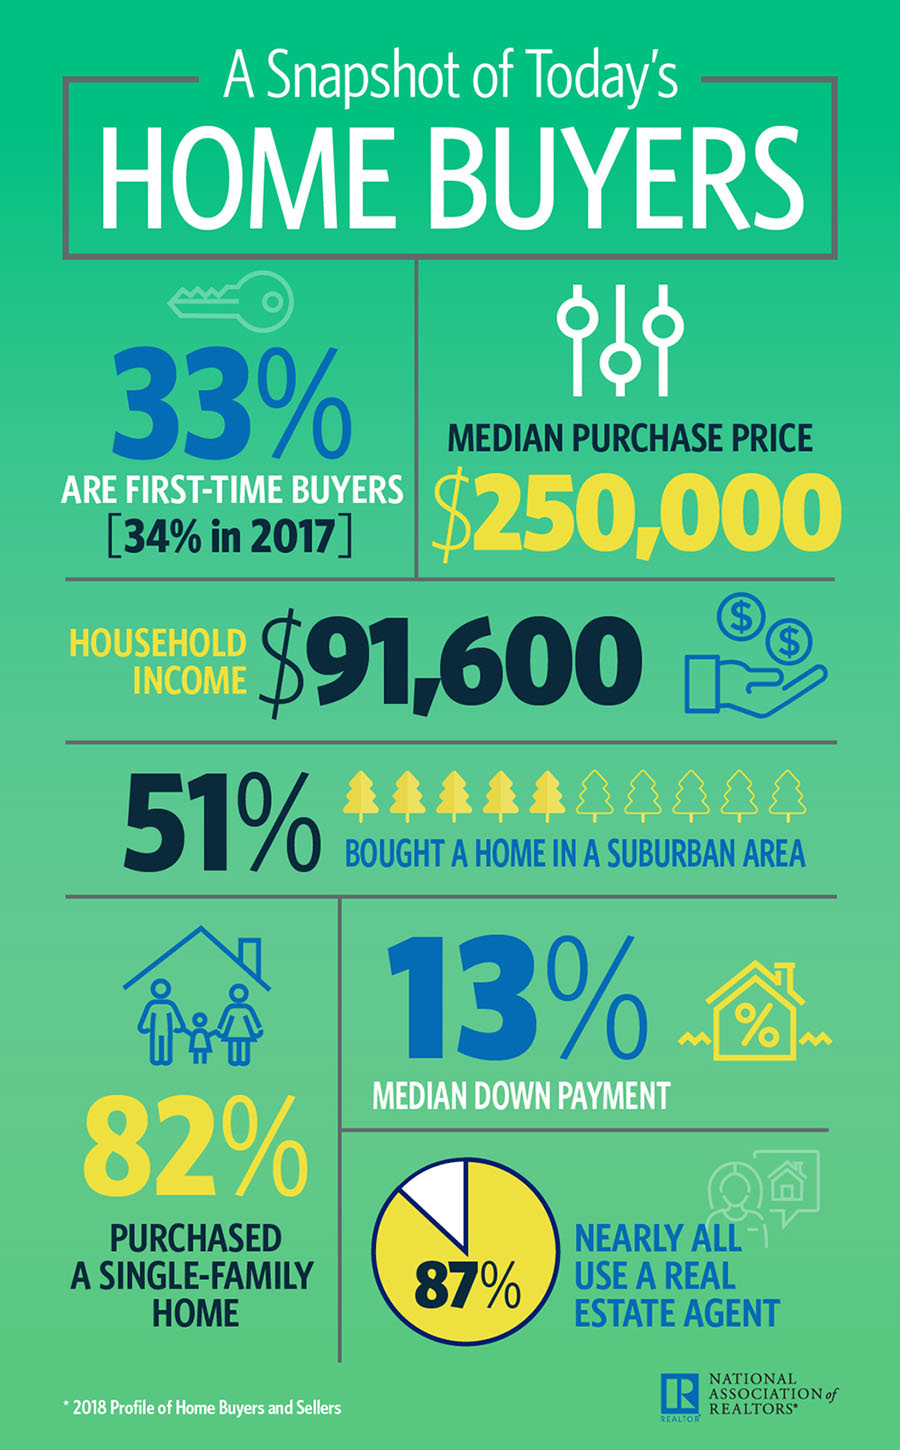 Snapshot on Home Buyer in 2018 (Infographic)